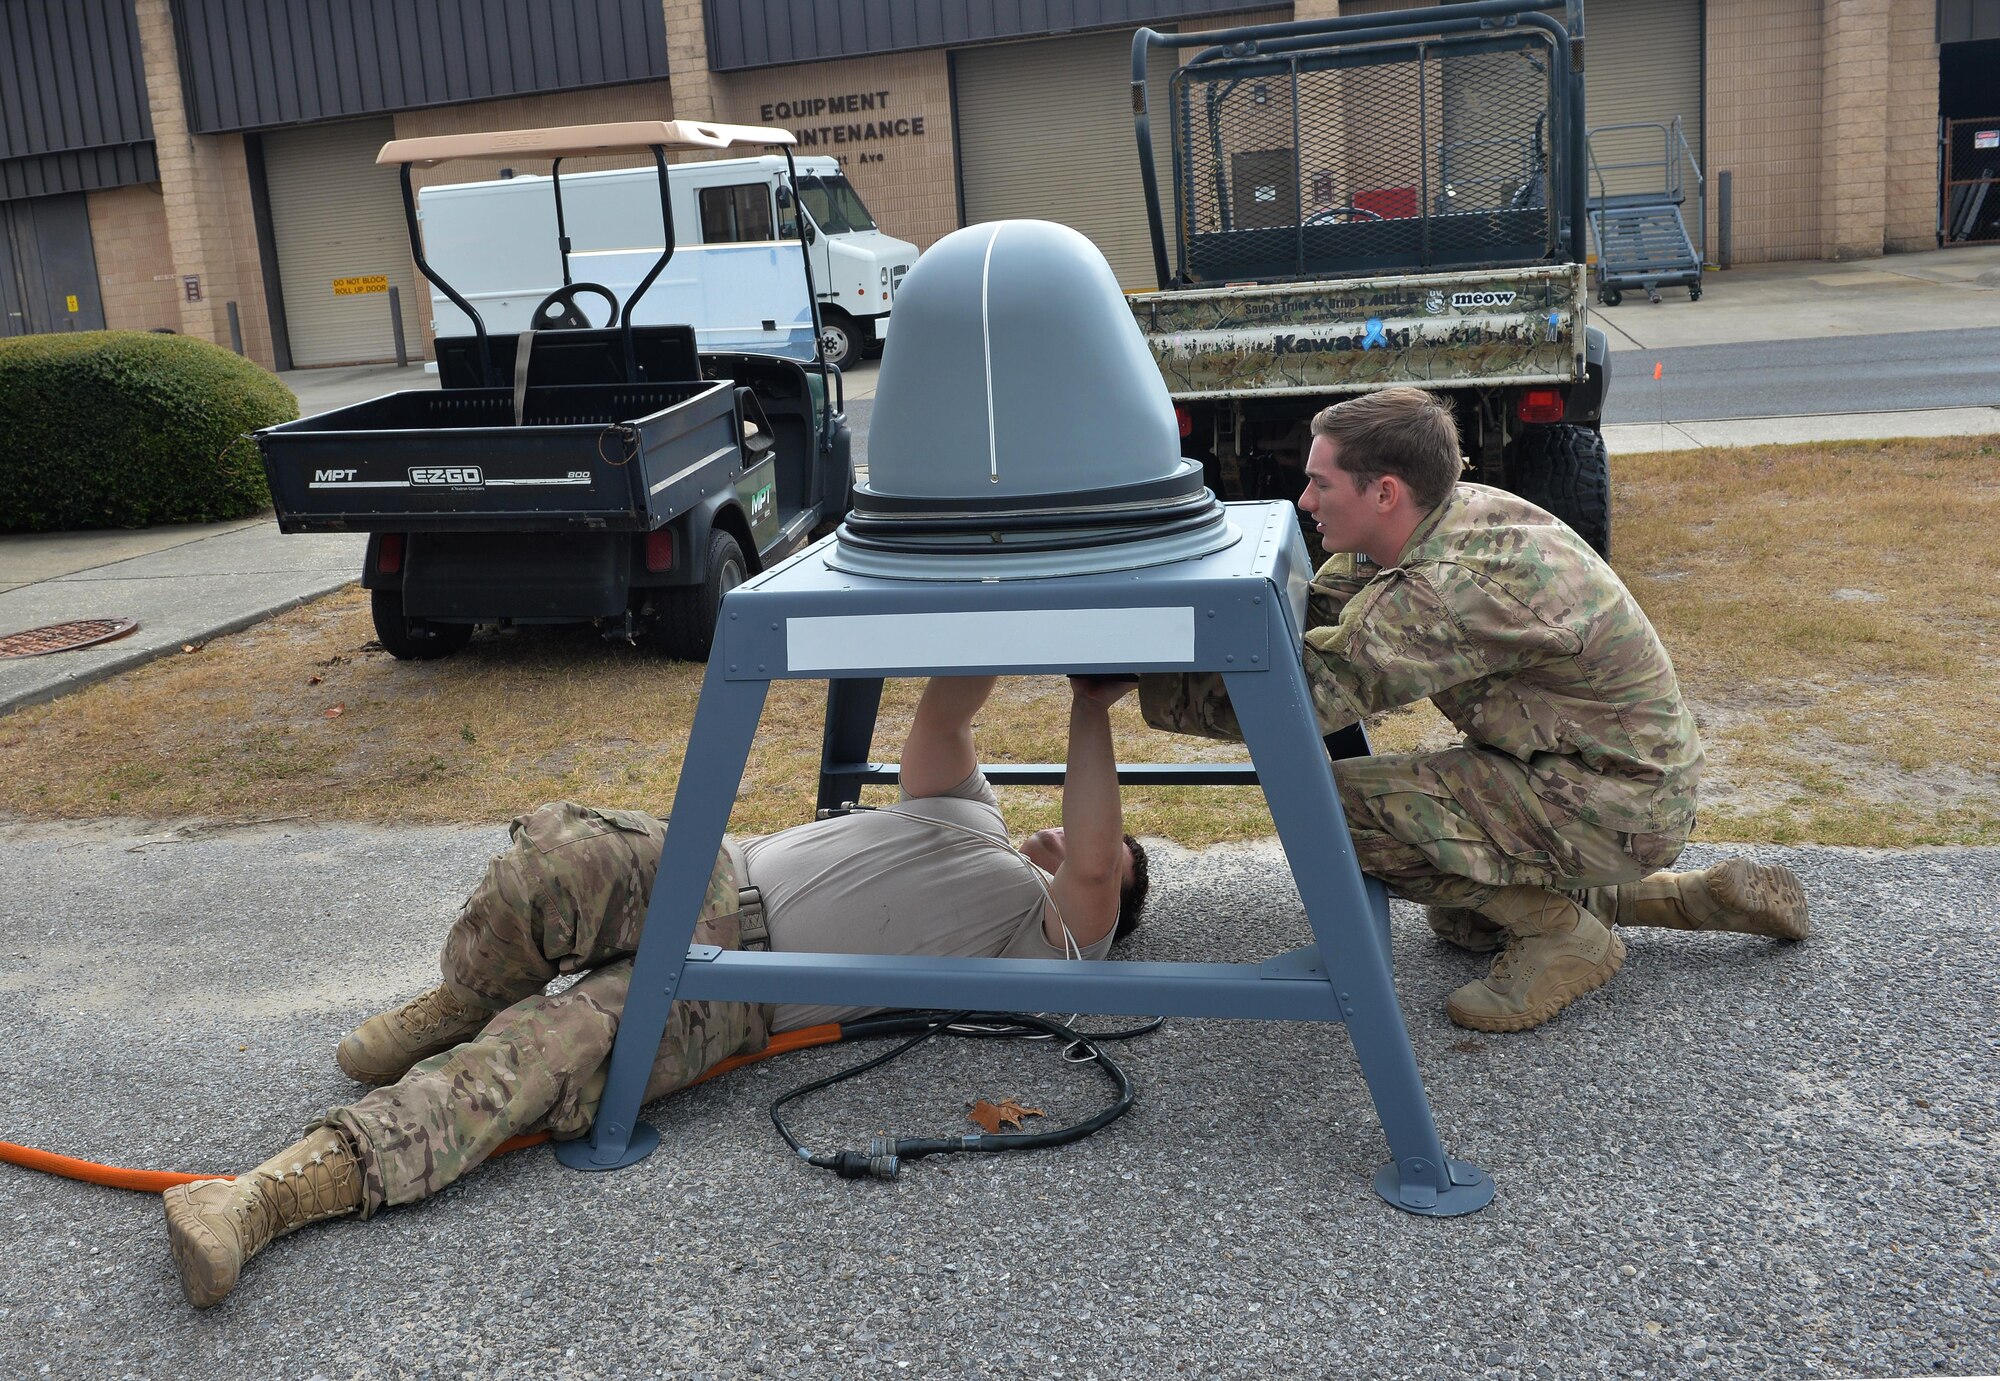 Senior Airmen Tyler Gray, left, and Daniel Burkemper, cyber transport system technicians with the 1st Special Operations Communications Squadron, conduct an operations check on a Ku Spread Spectrum antenna at Hurlburt Field, Fla., Nov. 29, 2016. The KuSS Antenna is an airborne broadband satellite communication system that transmits data, such as full-motion video that is crucial to real-time decision making, from pilots to command and control sites where deployed units are operating. (U.S. Air Force photo by Senior Airman Andrea Posey)